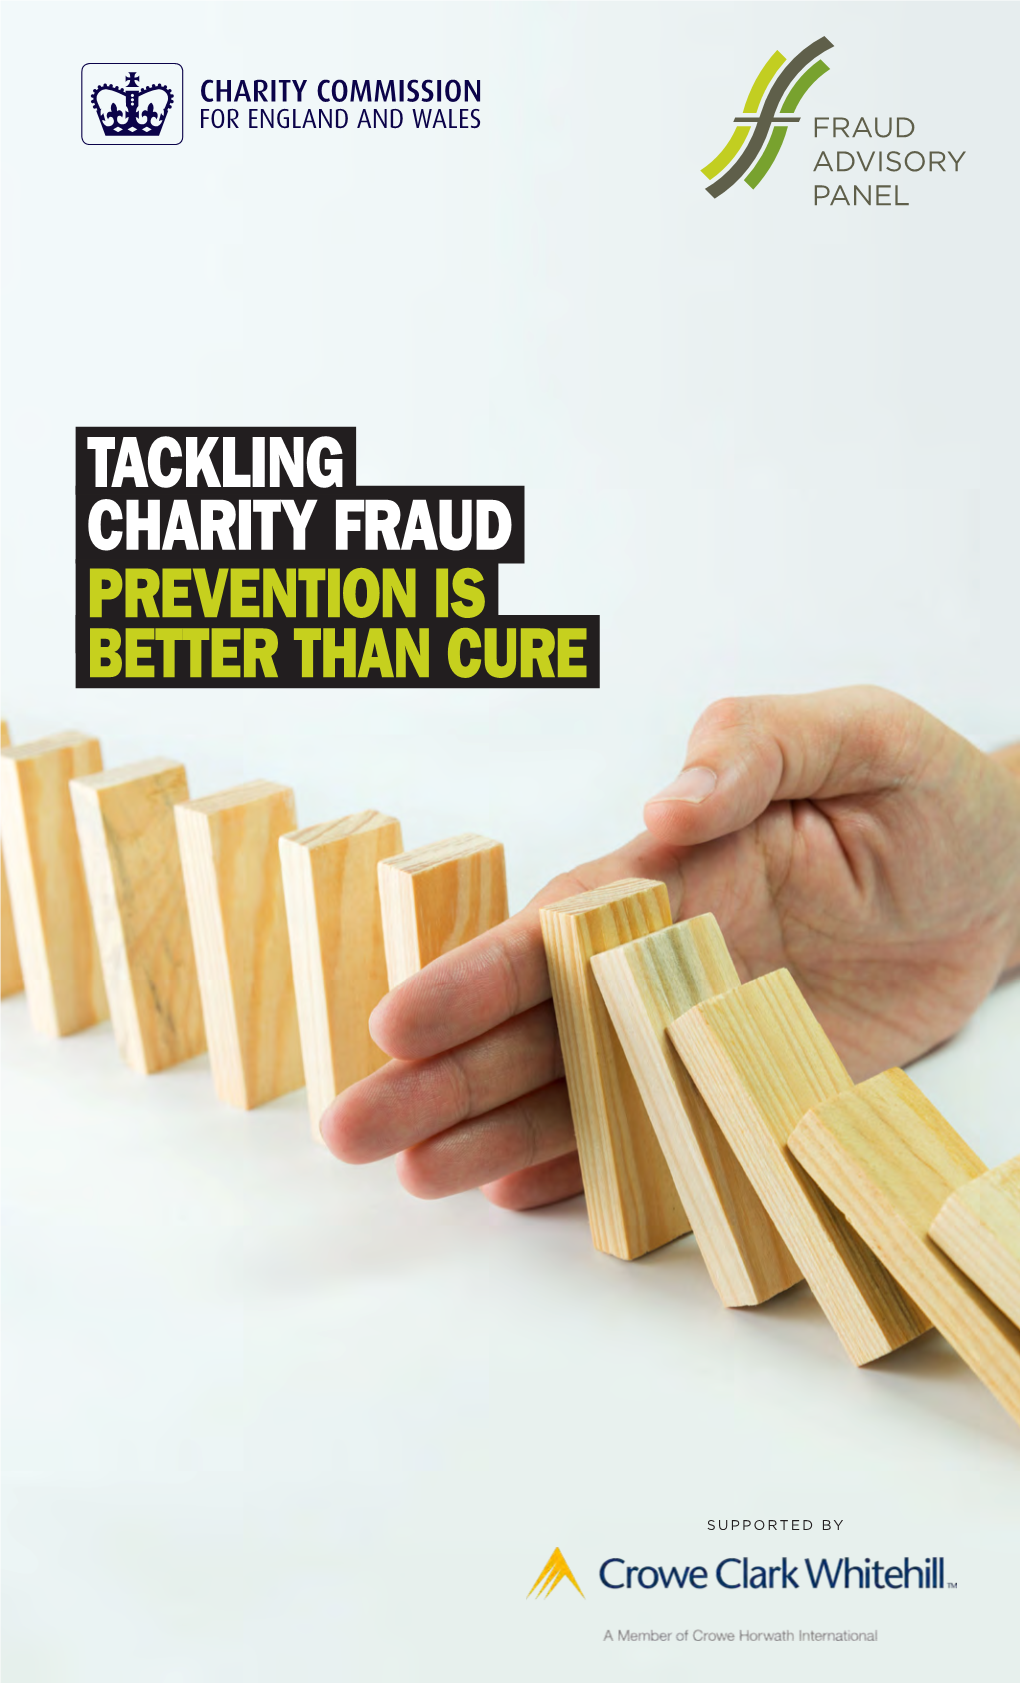 Tackling Charity Fraud Prevention Is Better Than Cure